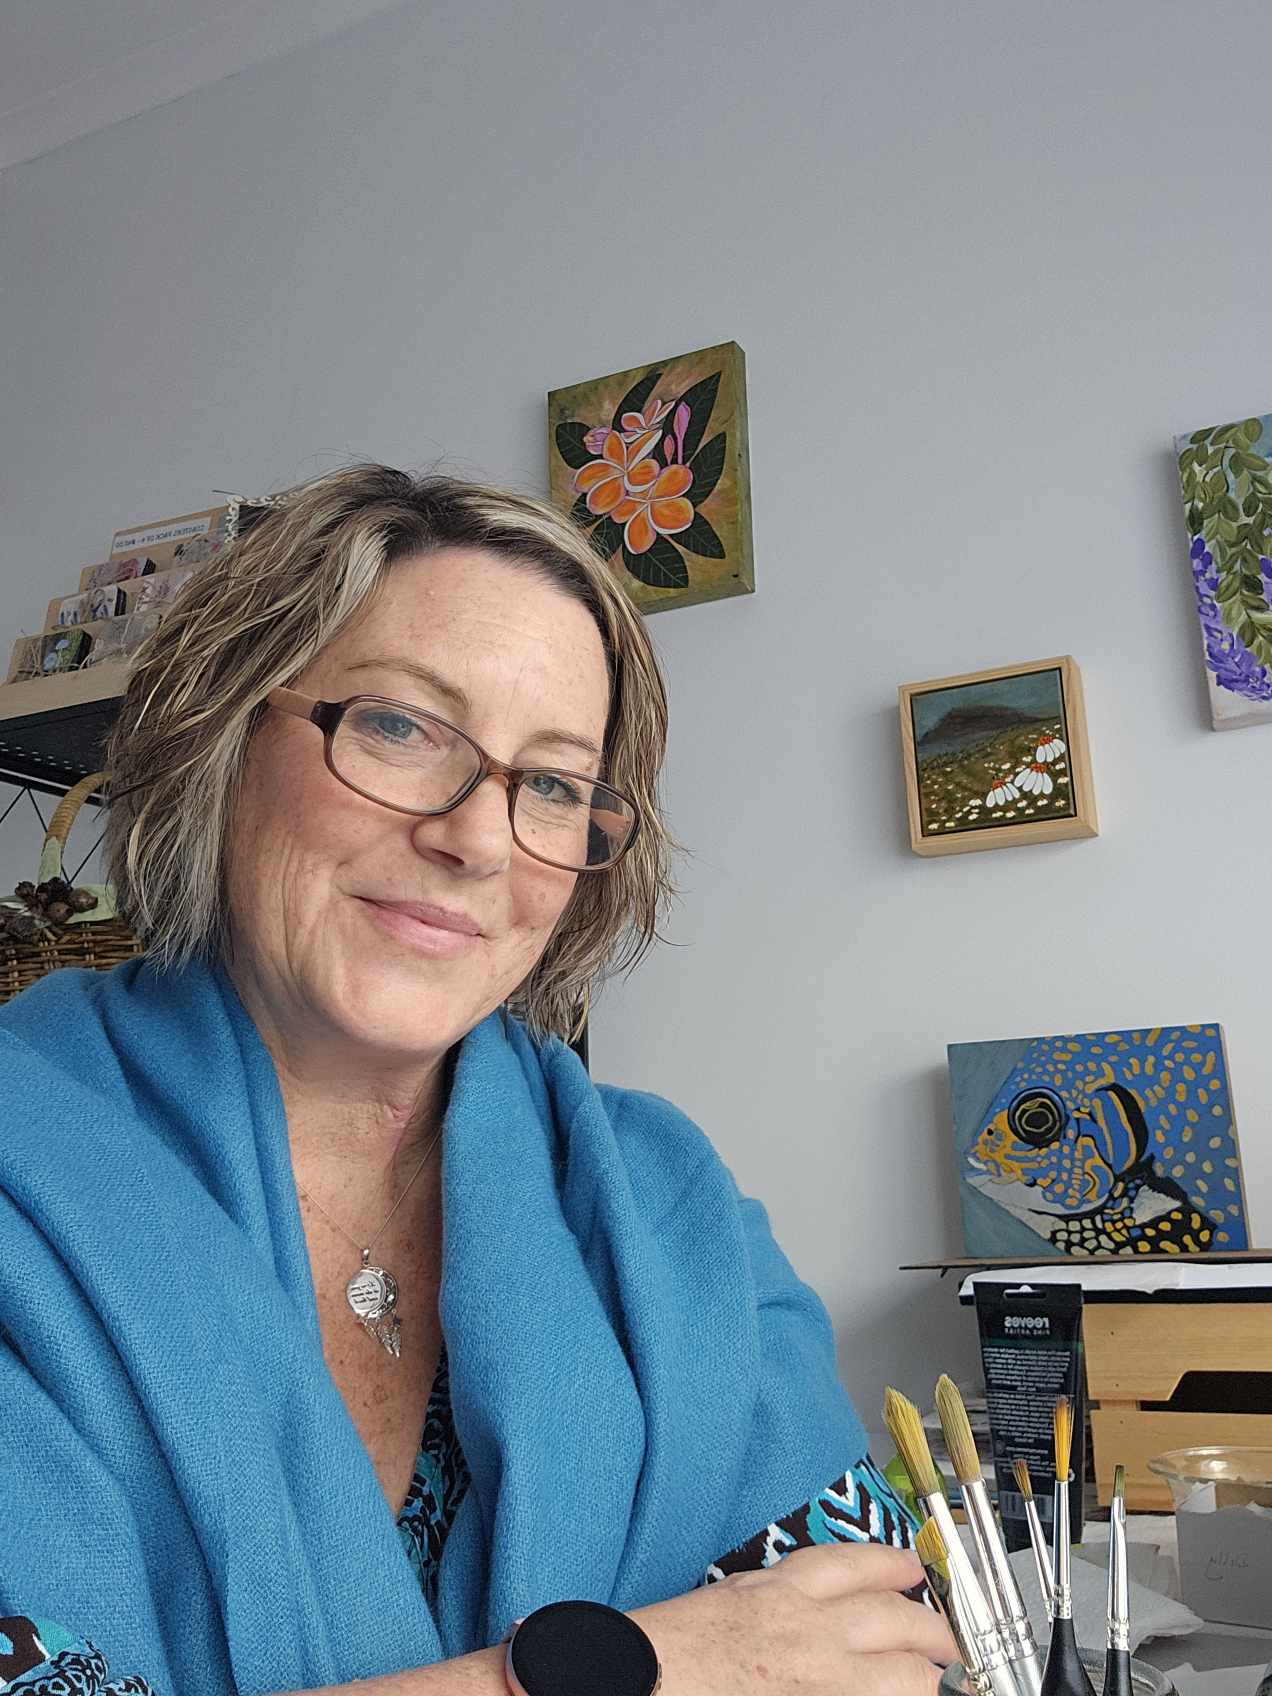 Image shows a photograph of Amanda Grubb for the Artist Profile with Art Trails Tasmania